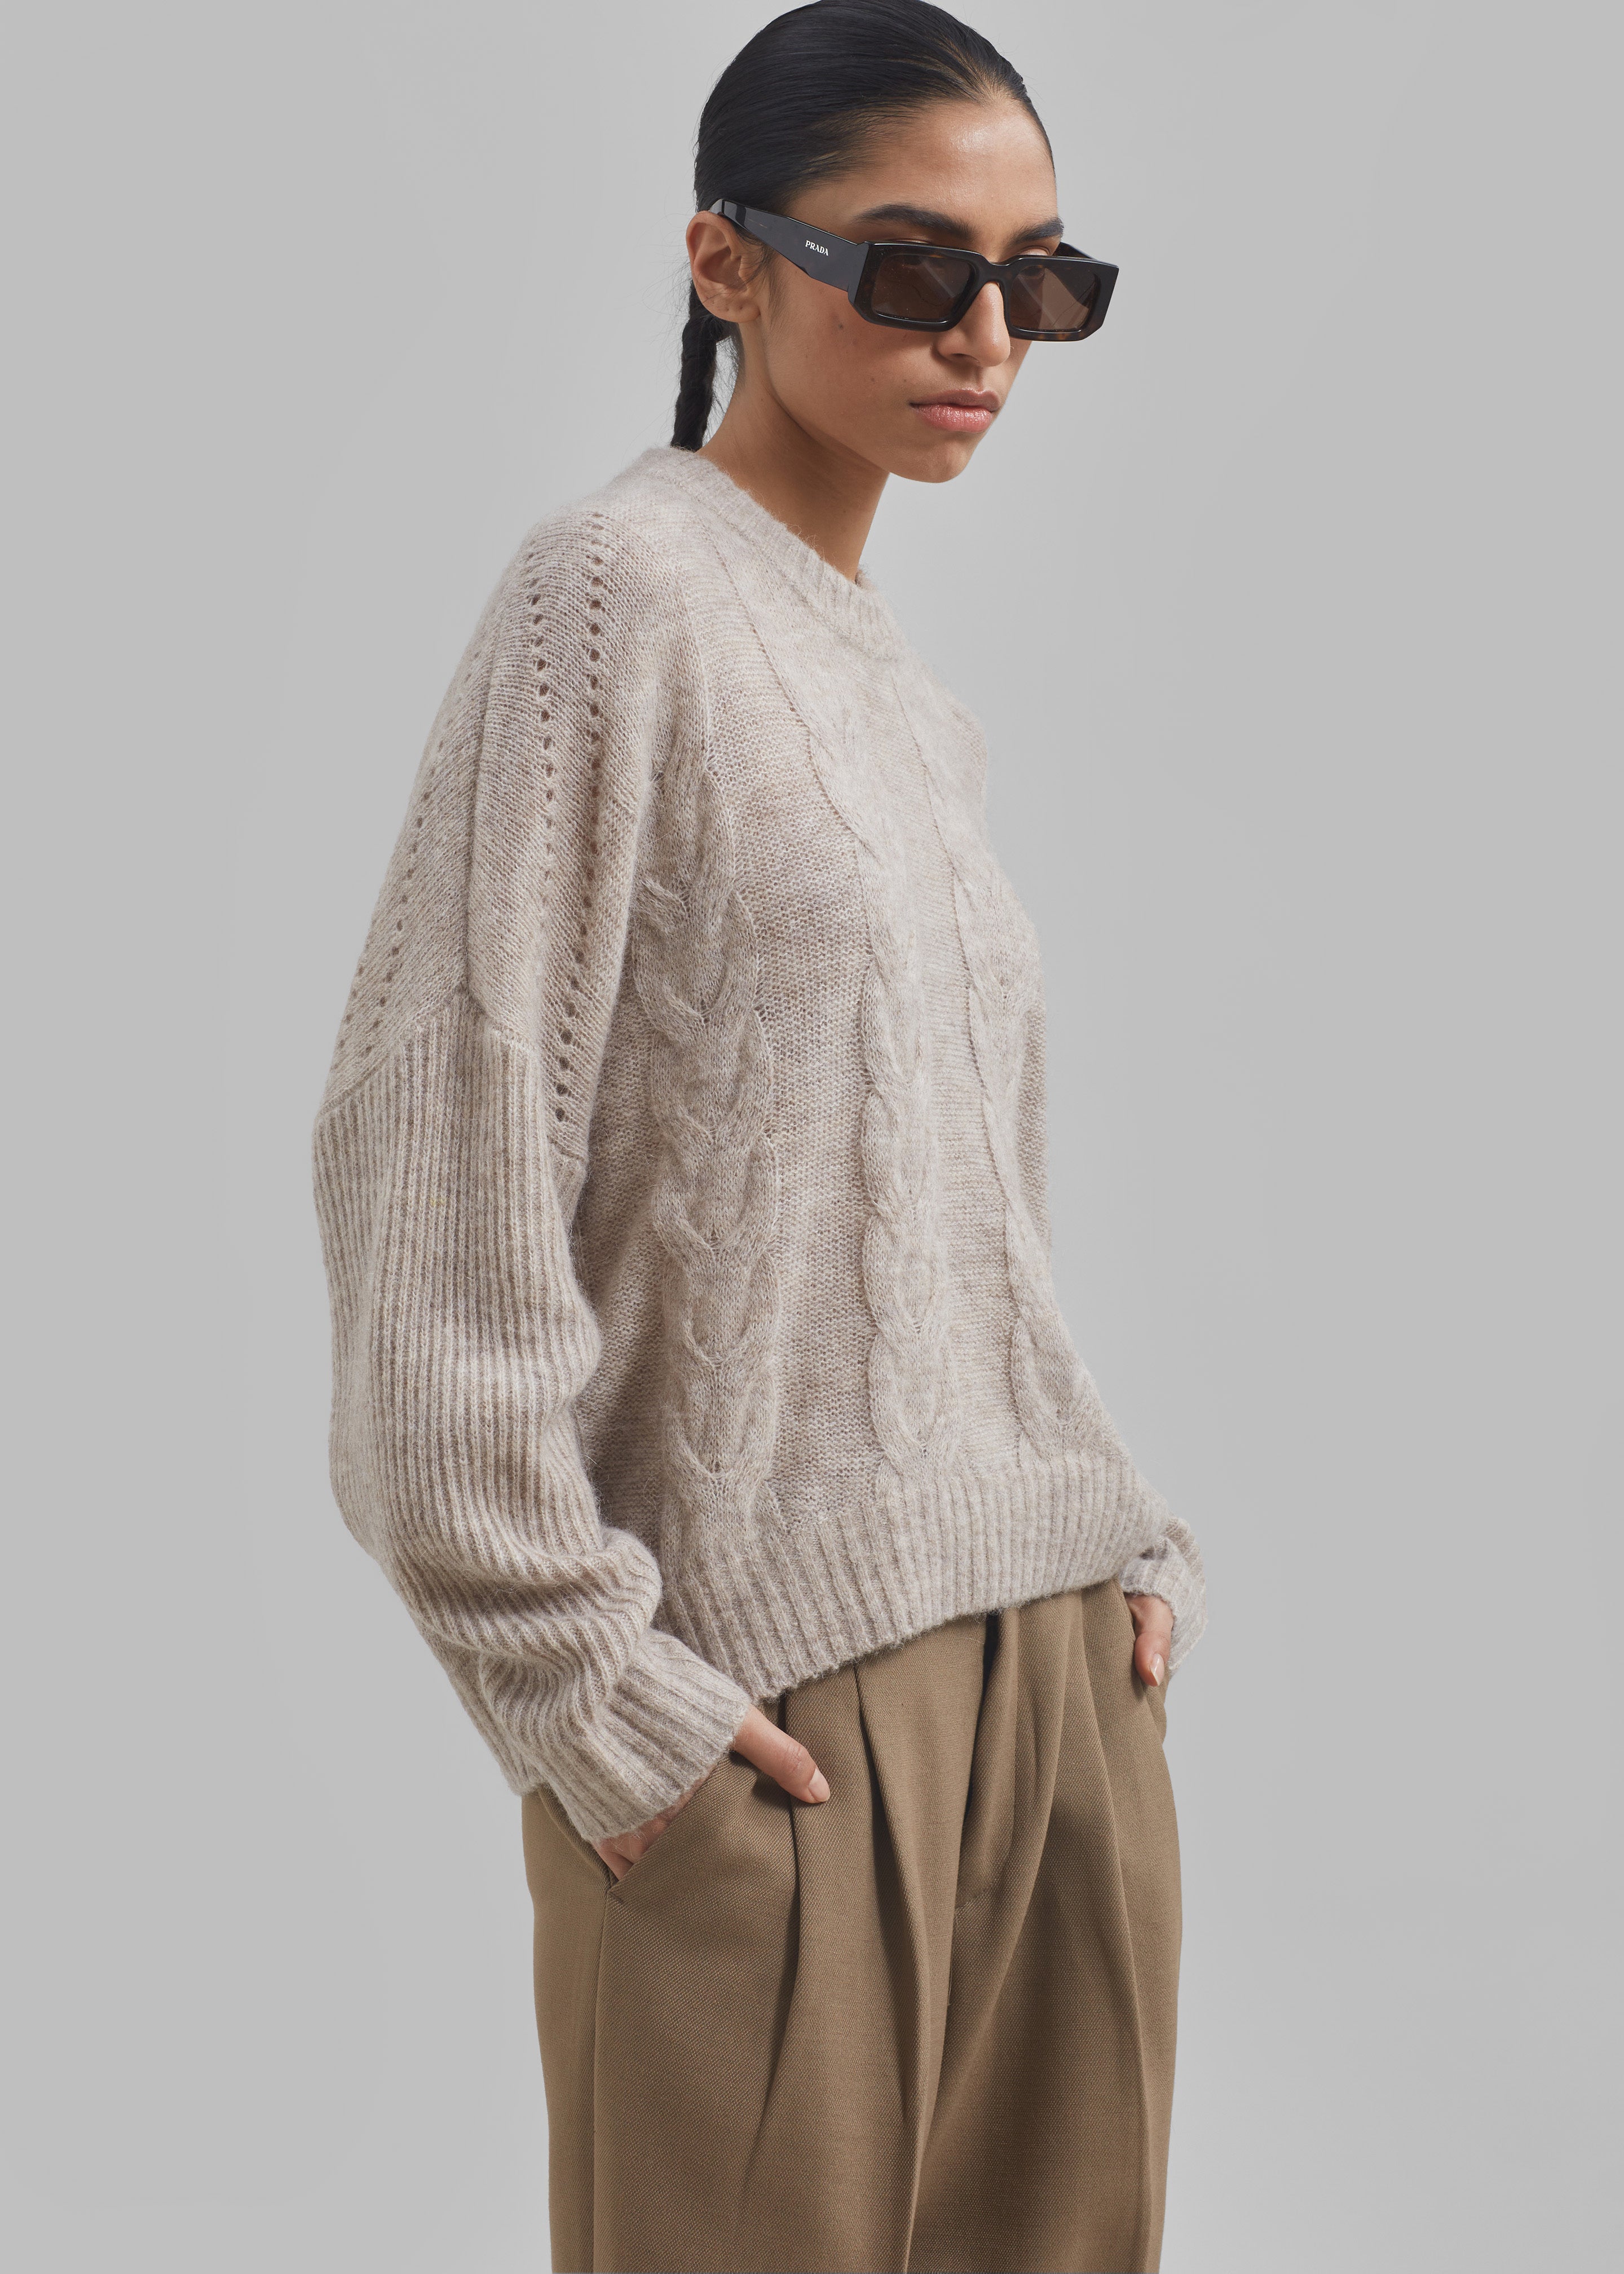 The Garment Verbier Boxy Cable Sweater - Linen - 1